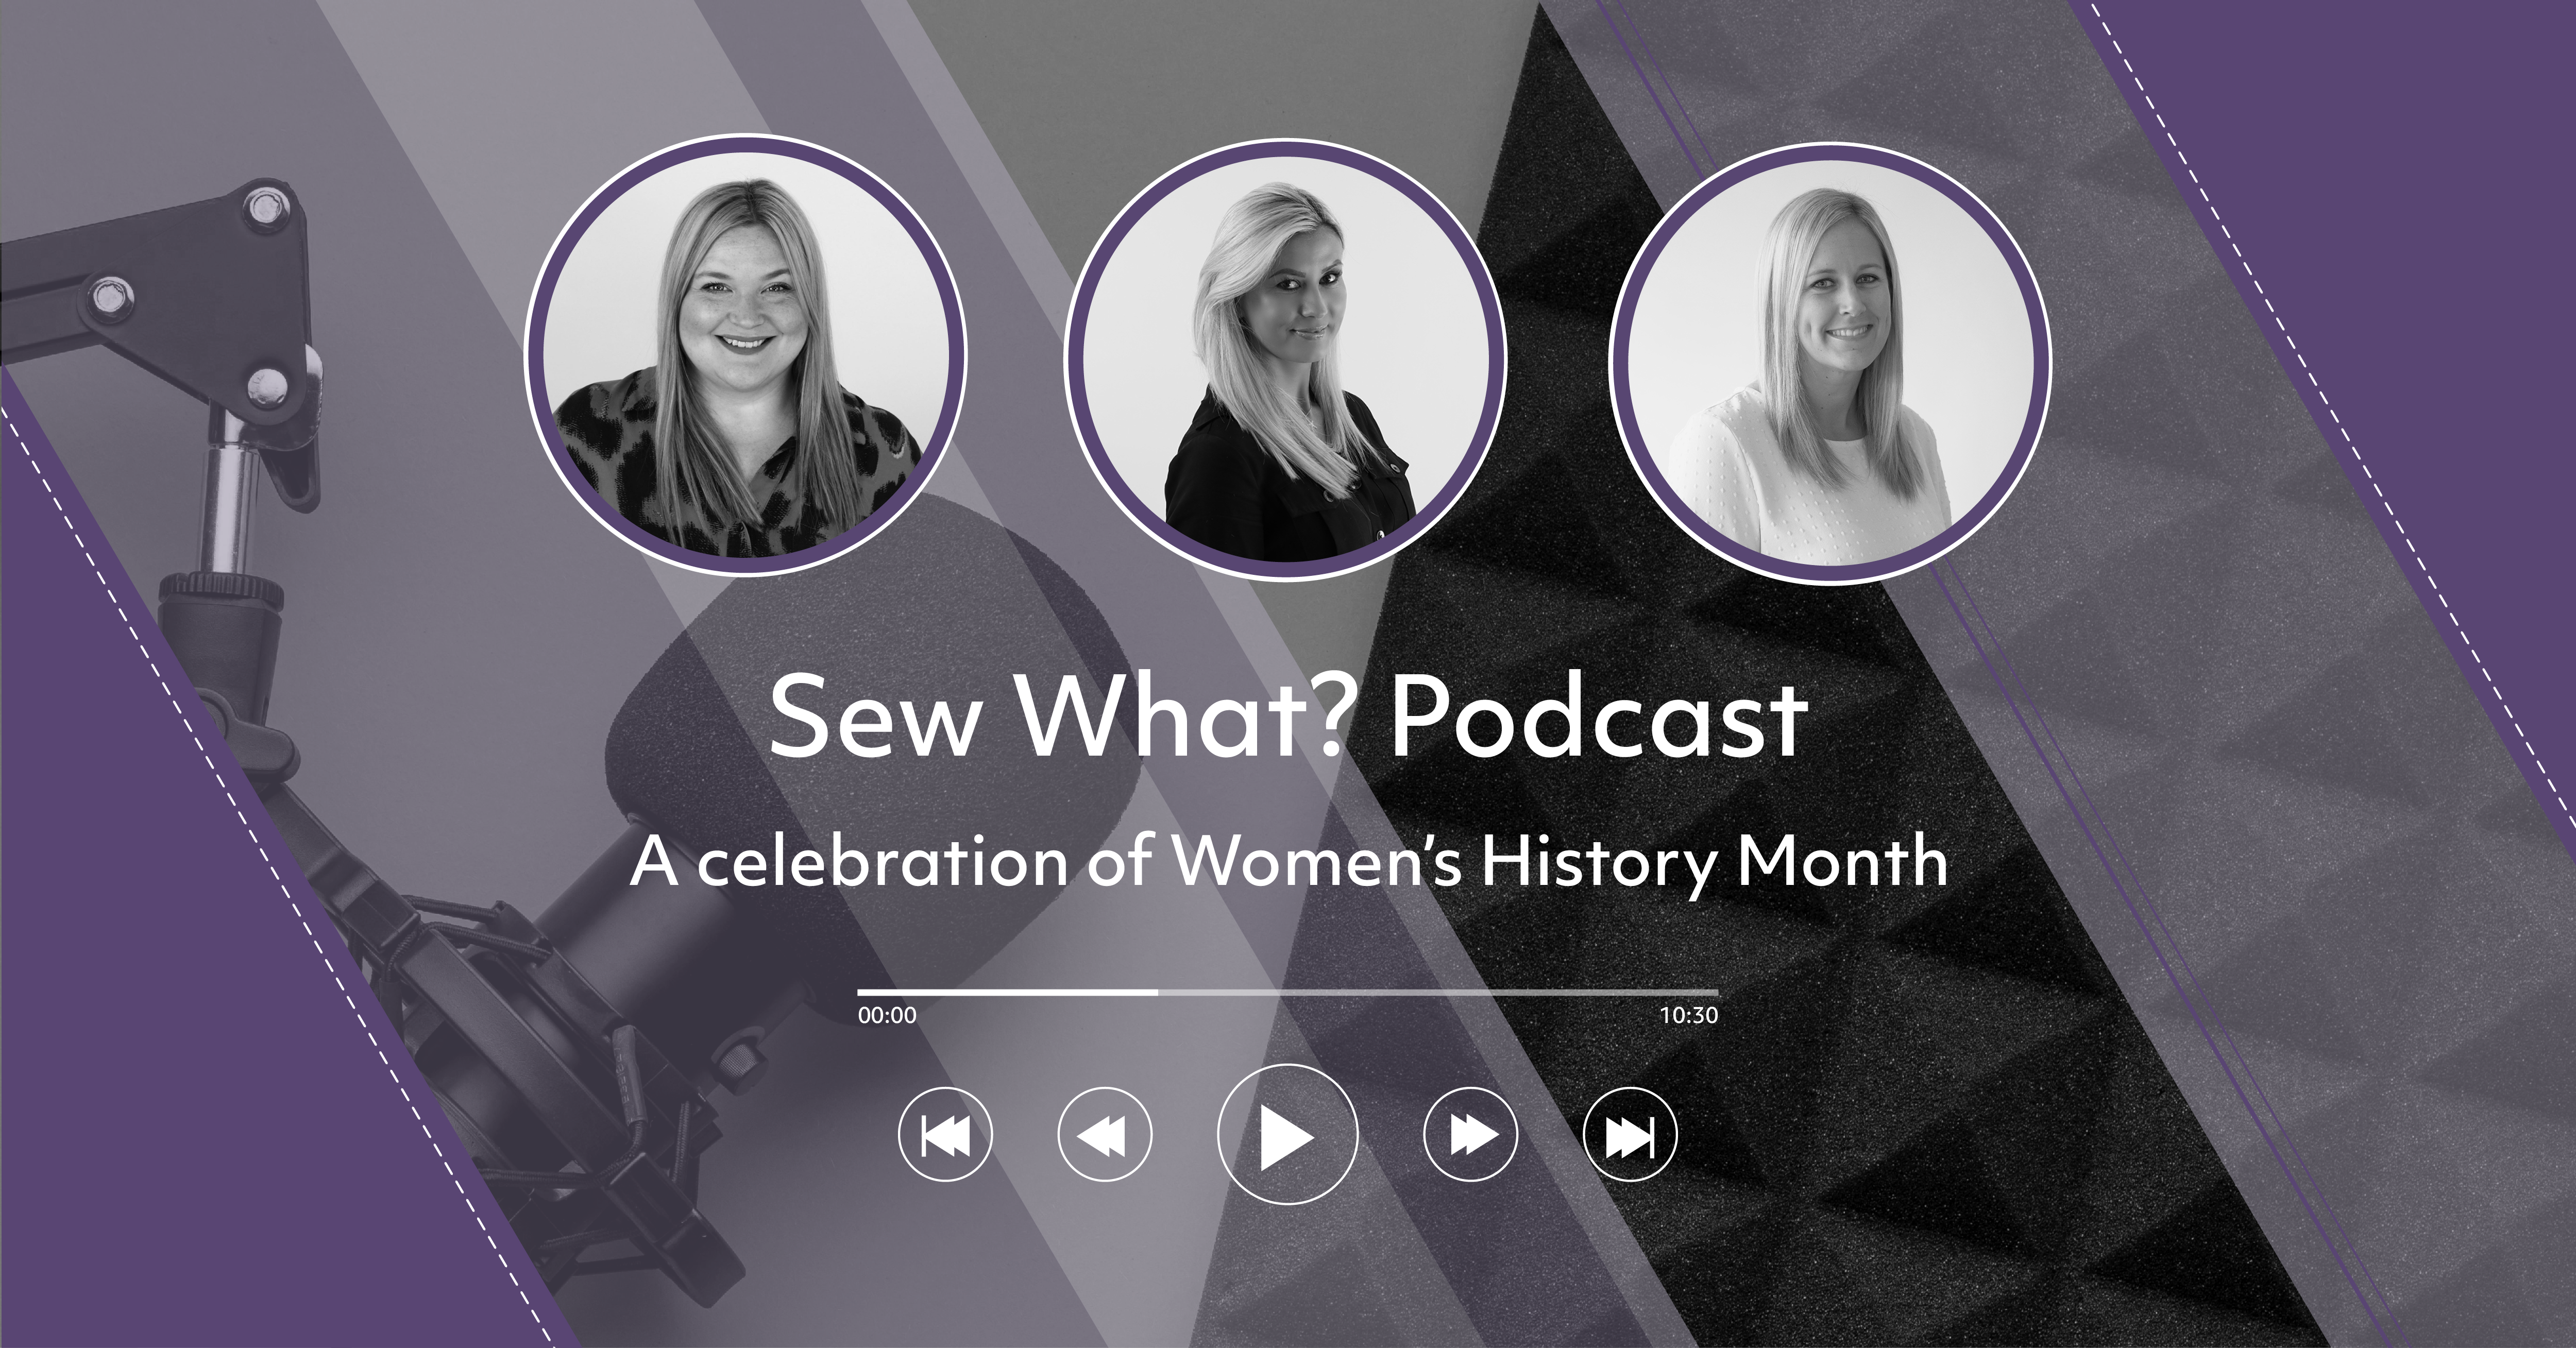 Sew What? Podcast Episode 2